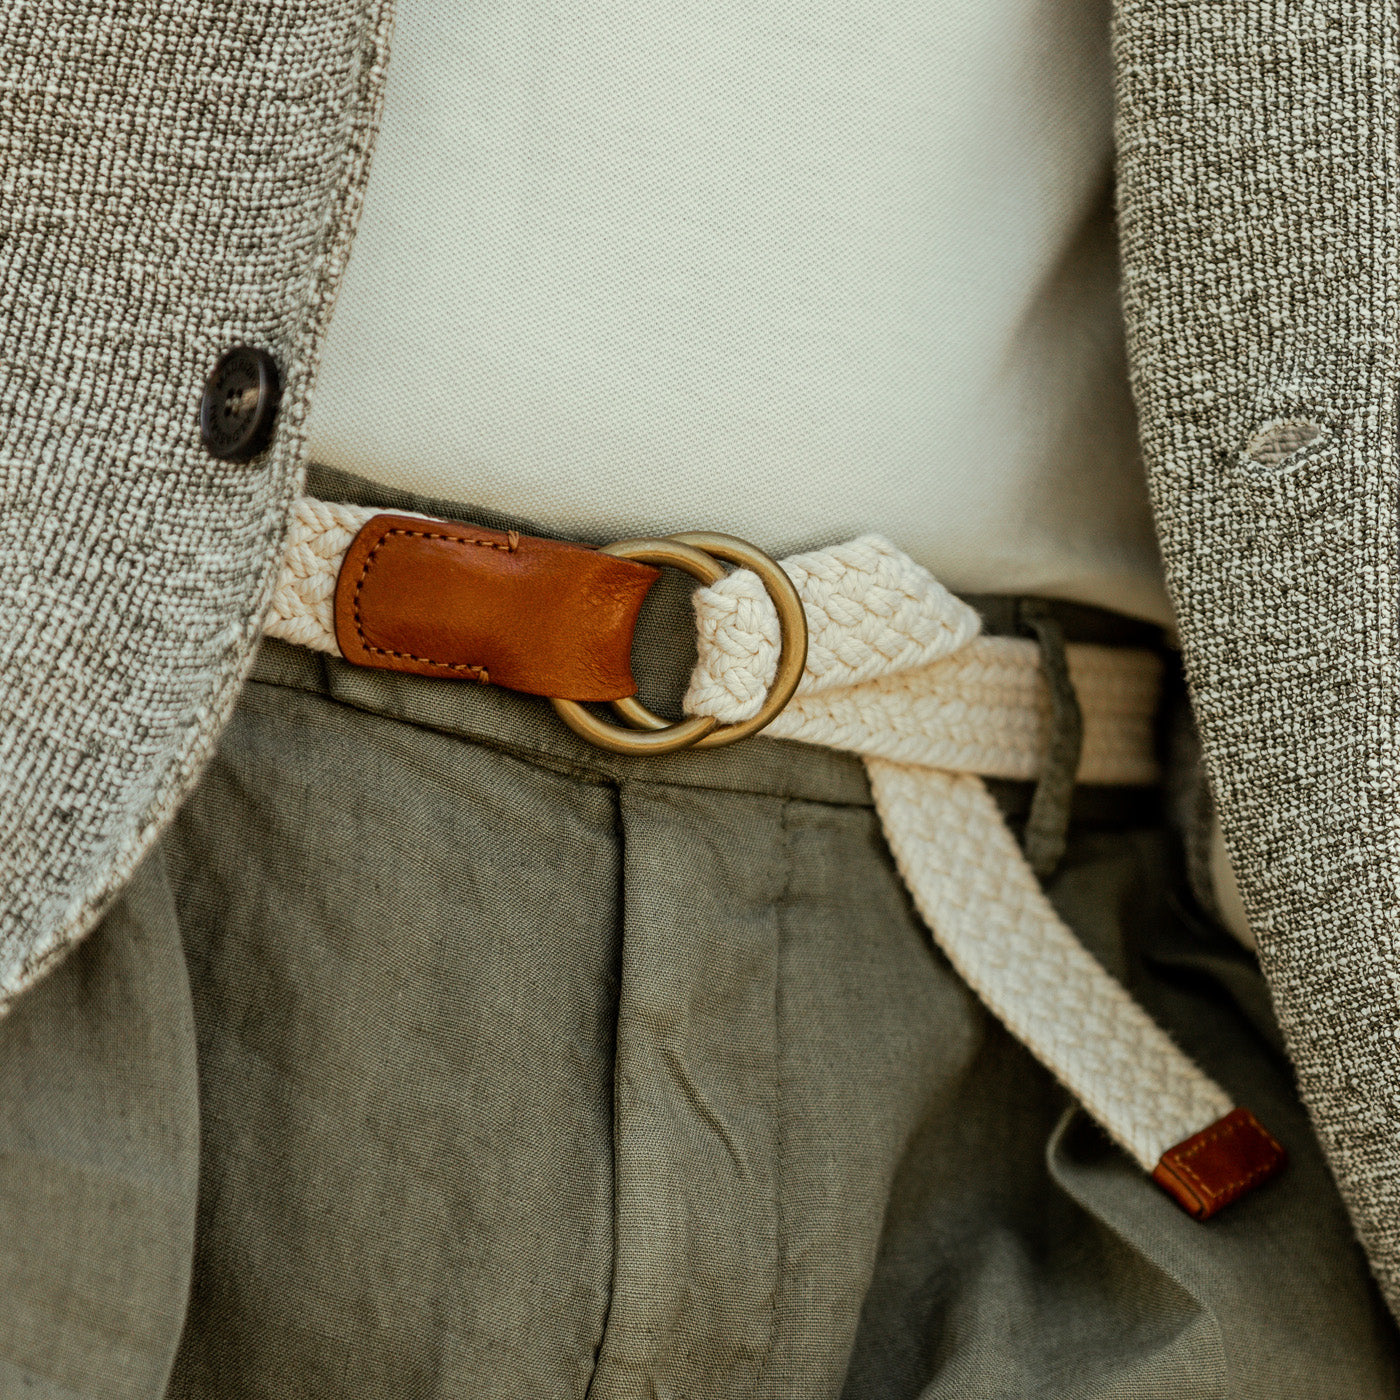 Over Under Belt ~ Waxed Canvas Belt in Tan – 6Whiskey Company